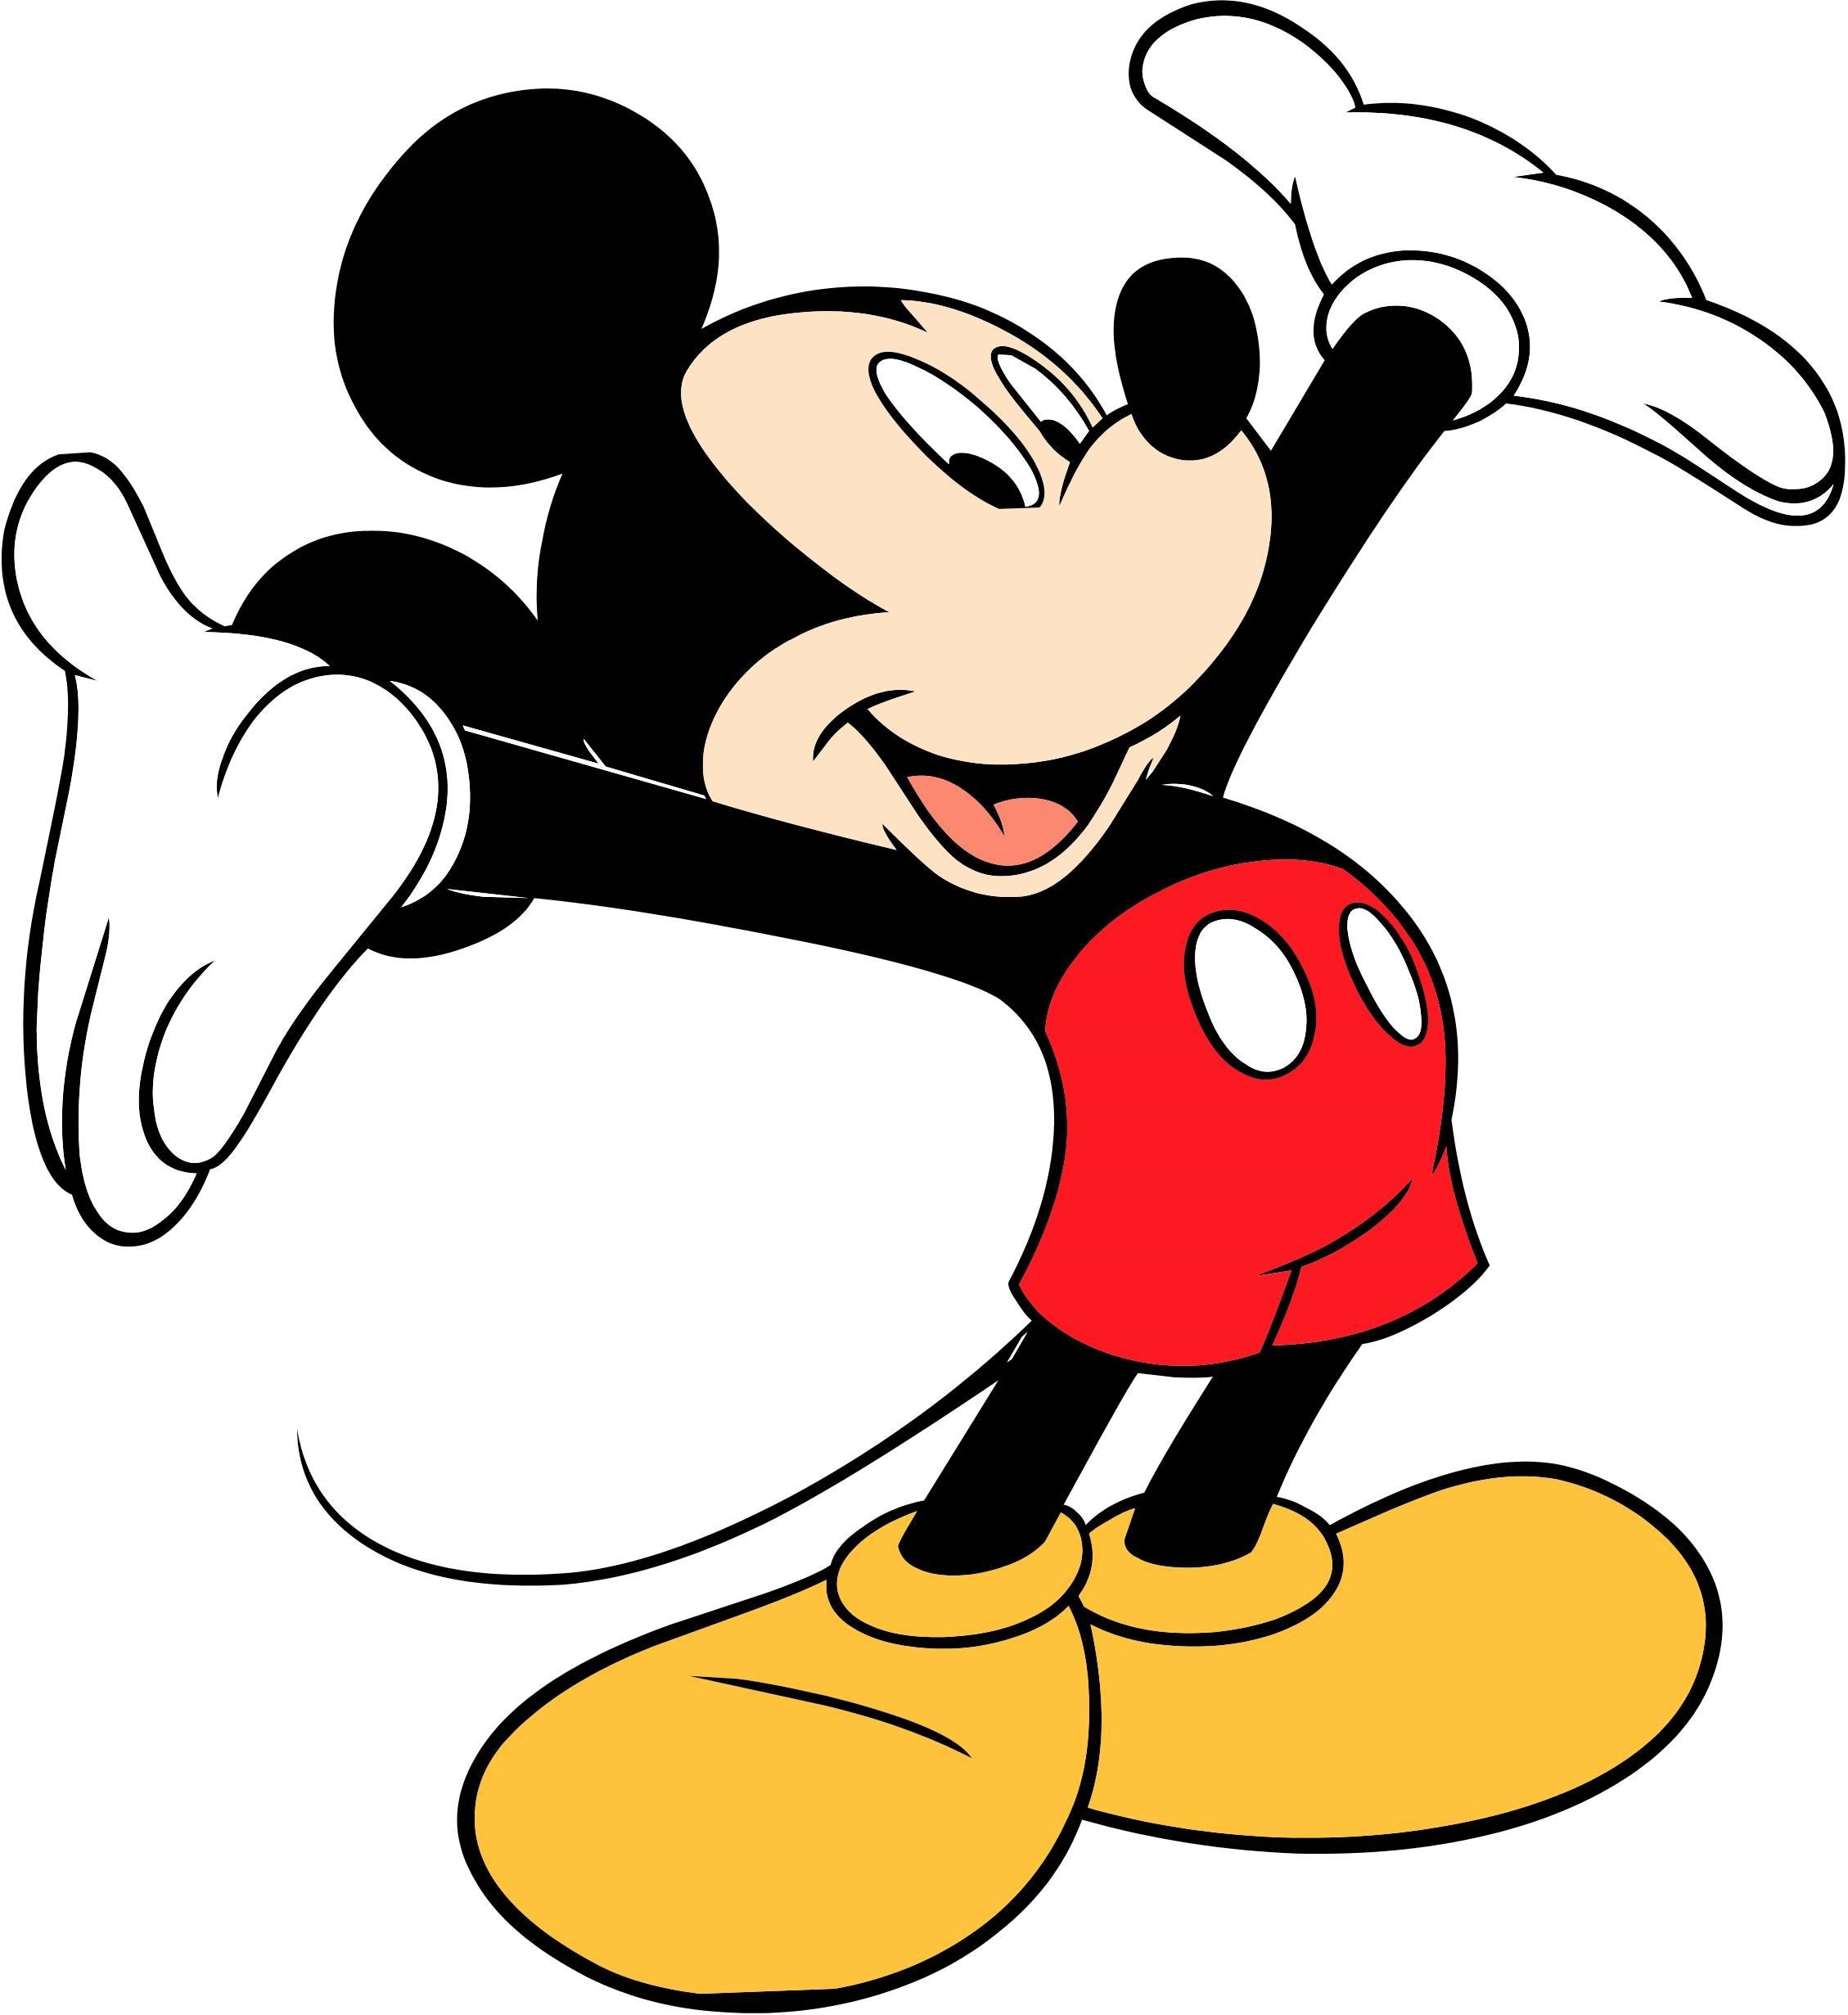 Mickey Mouse Clip Art Images Black - Mickey Mouse White Background - HD Wallpaper 